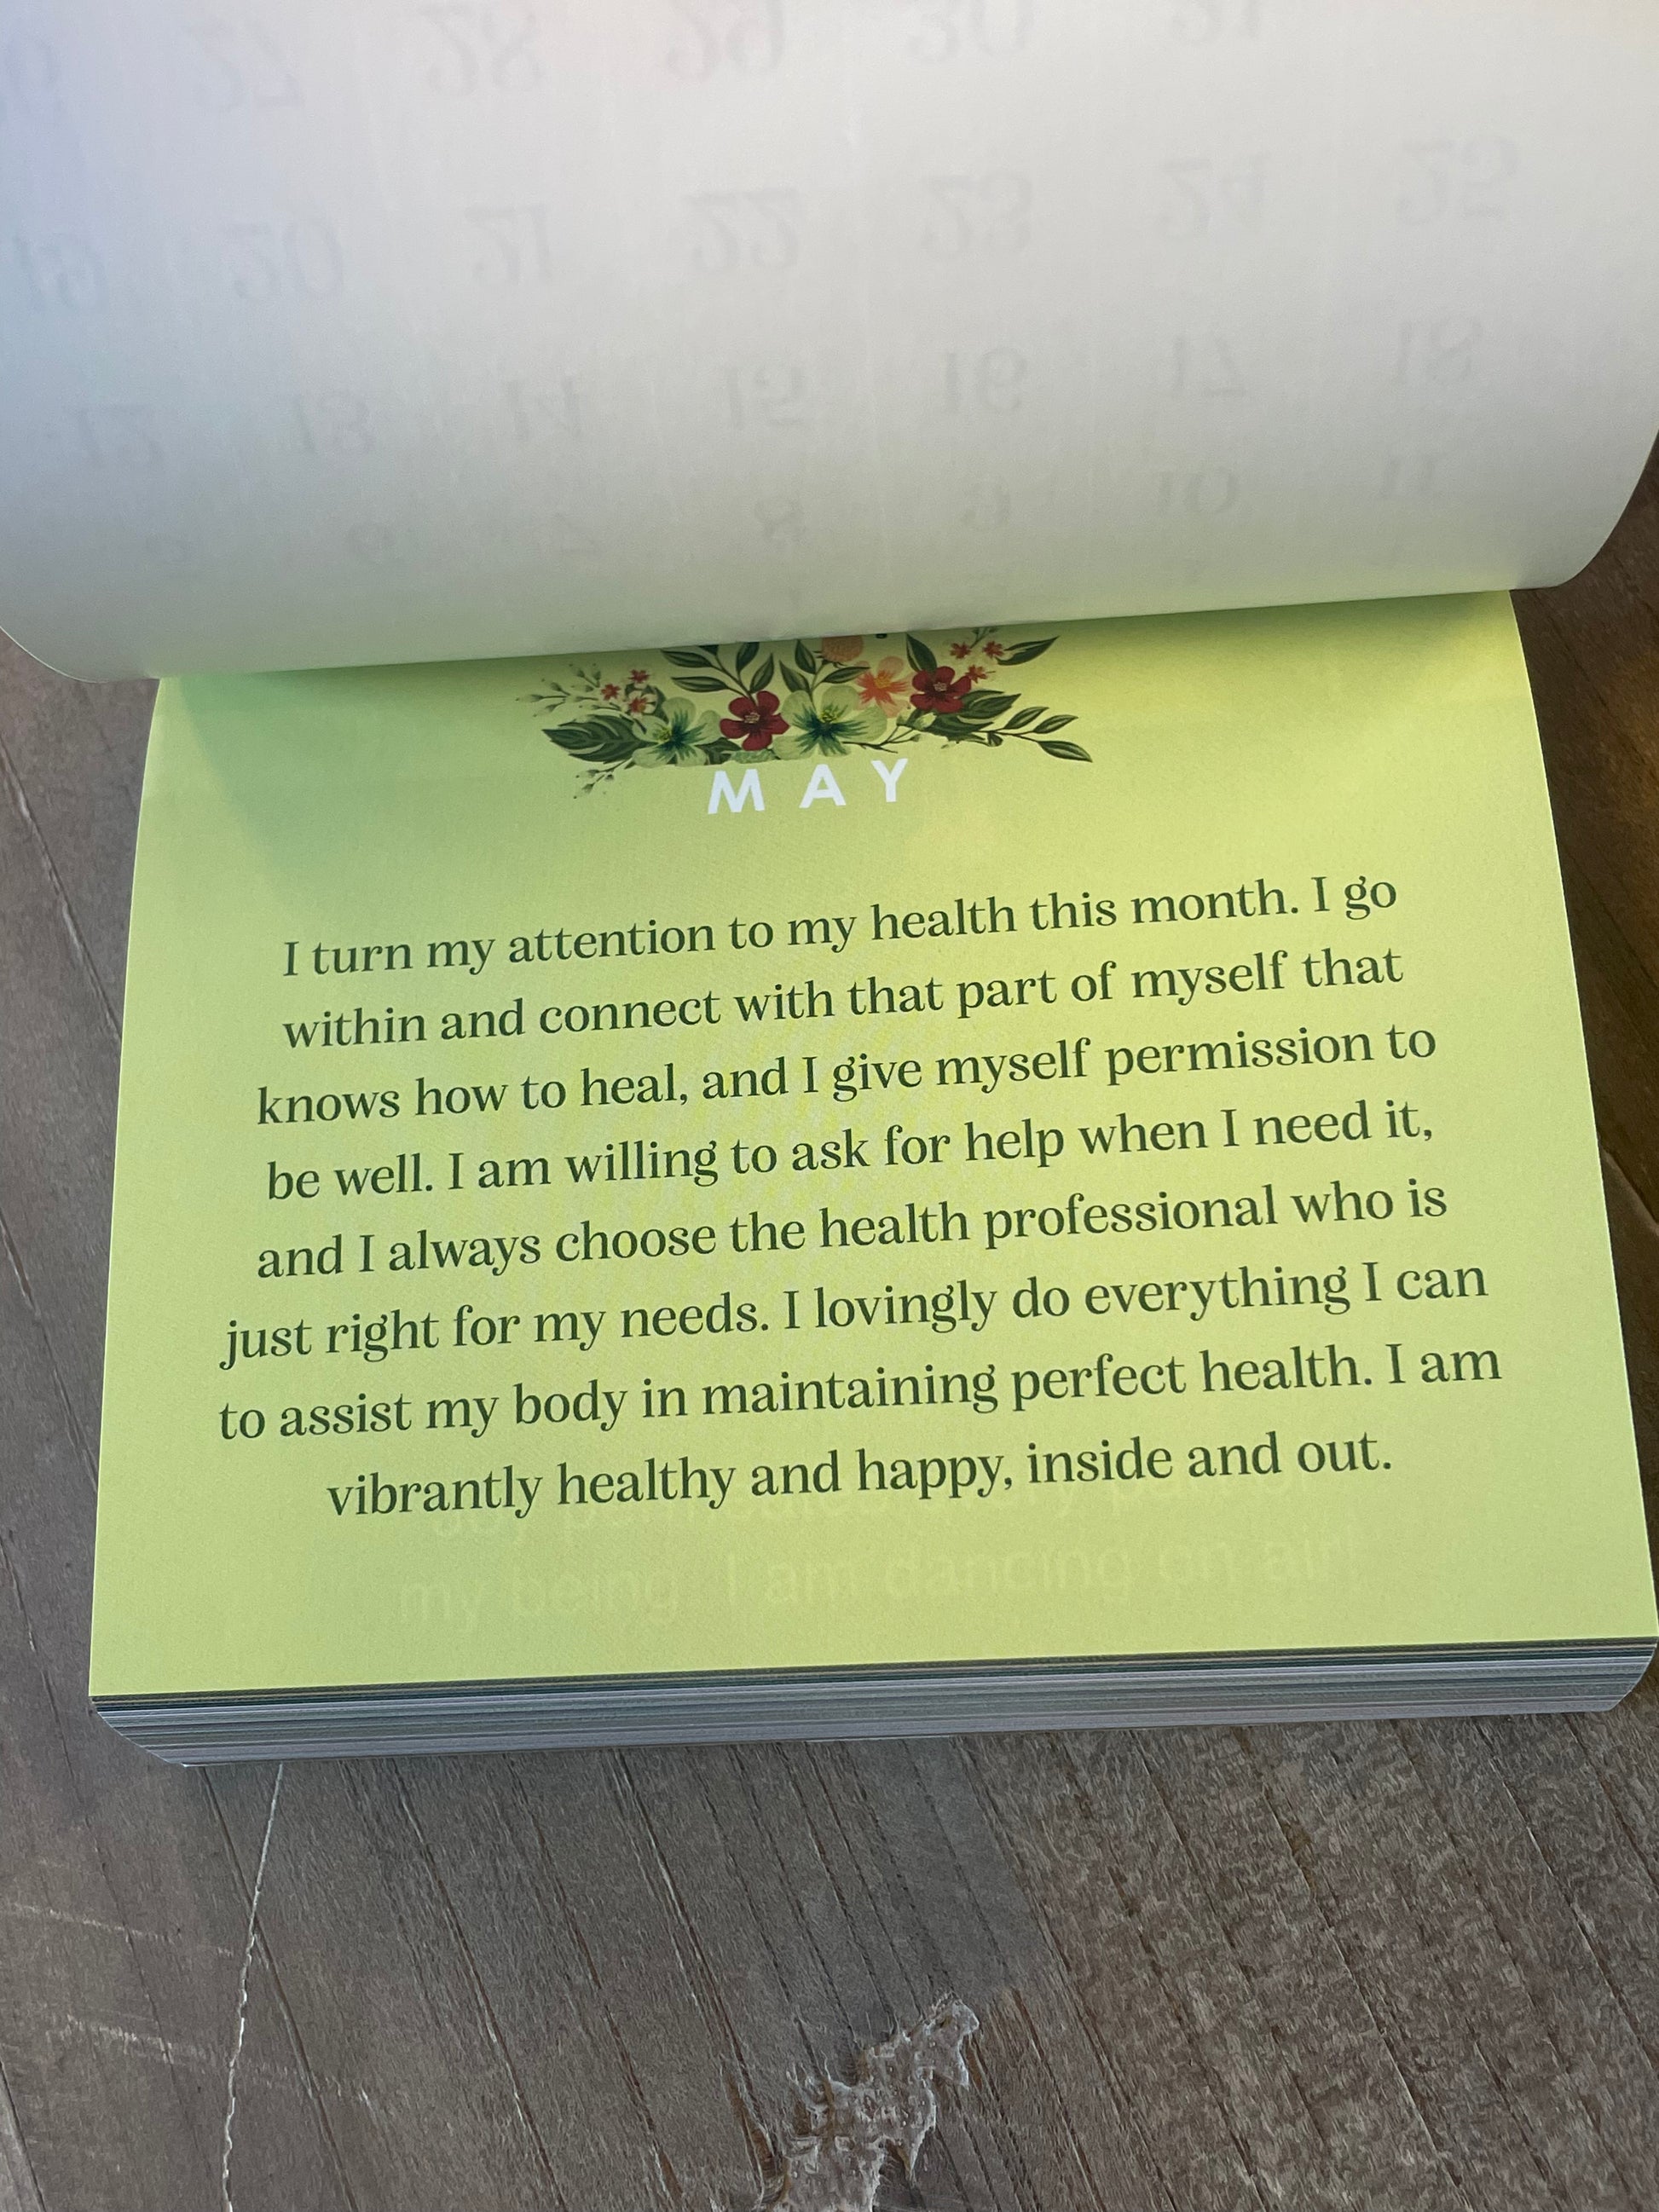 I Can Do It! 2024 Affirmation Calendar by Louise Hay